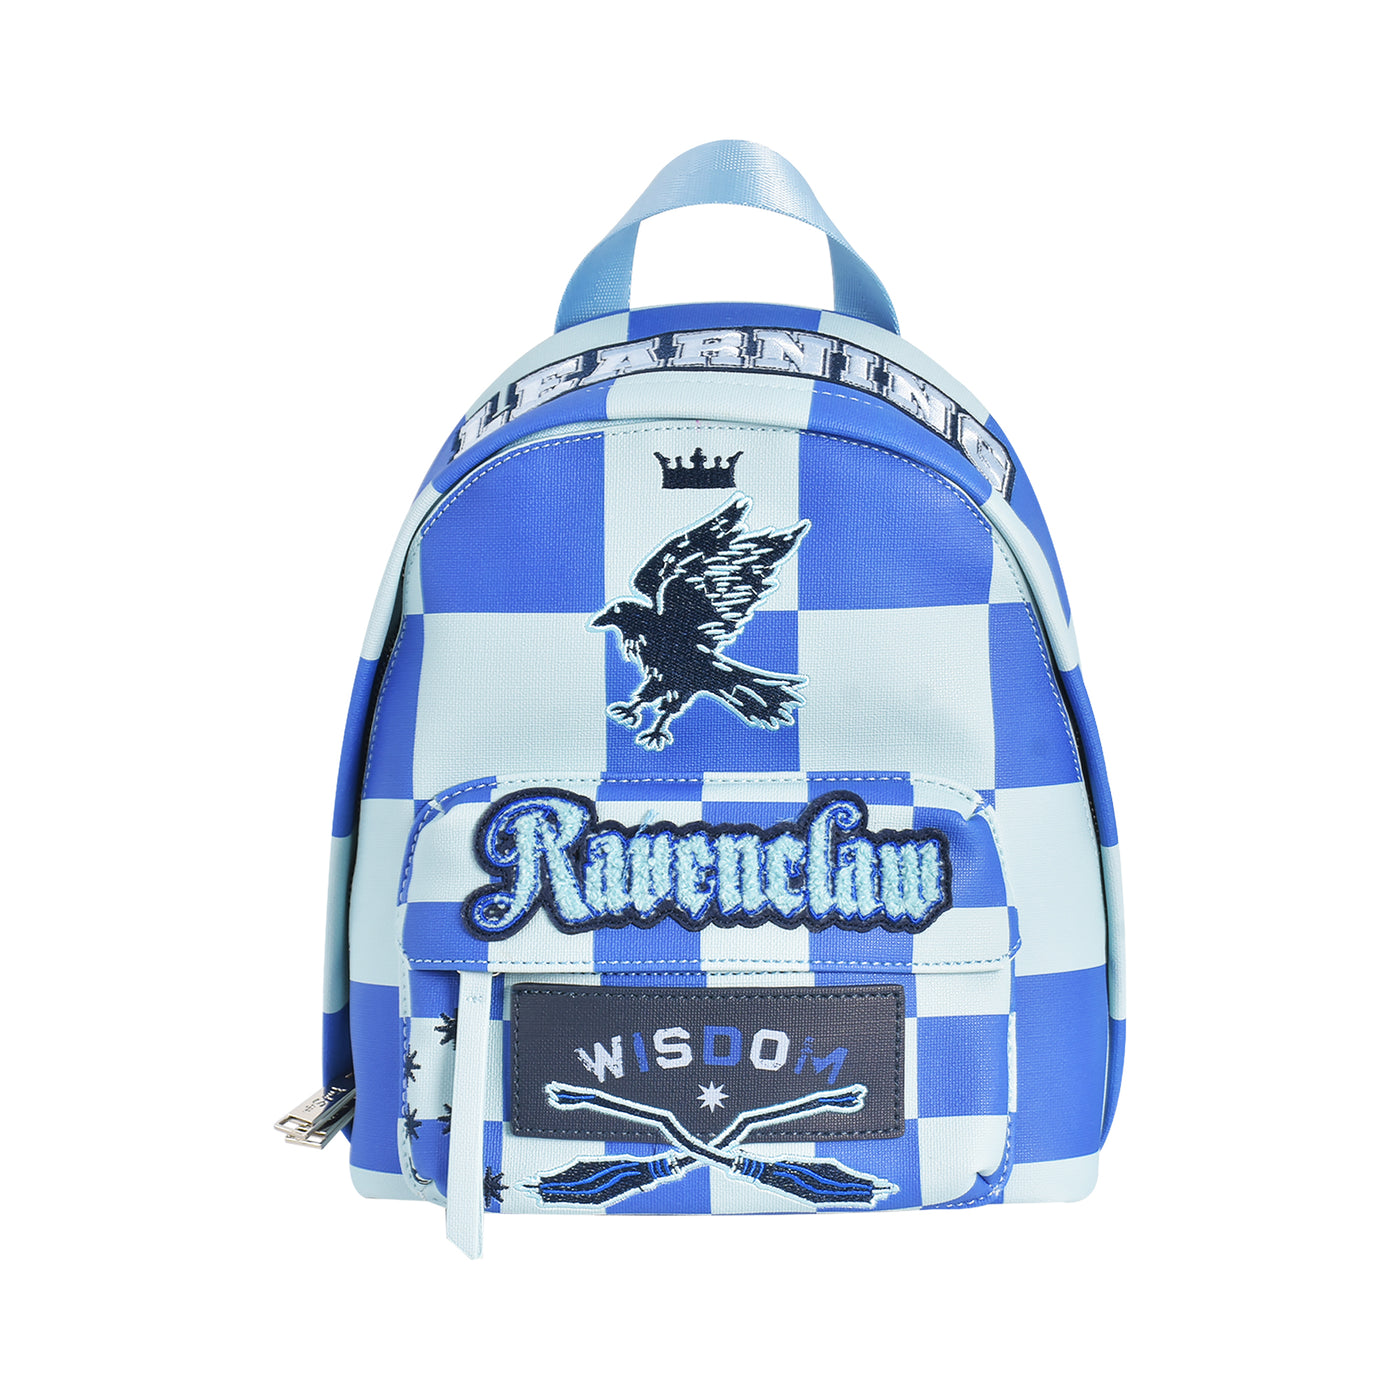 Fred Segal Harry Potter Checker Ravenclaw Mini Backpack - Front